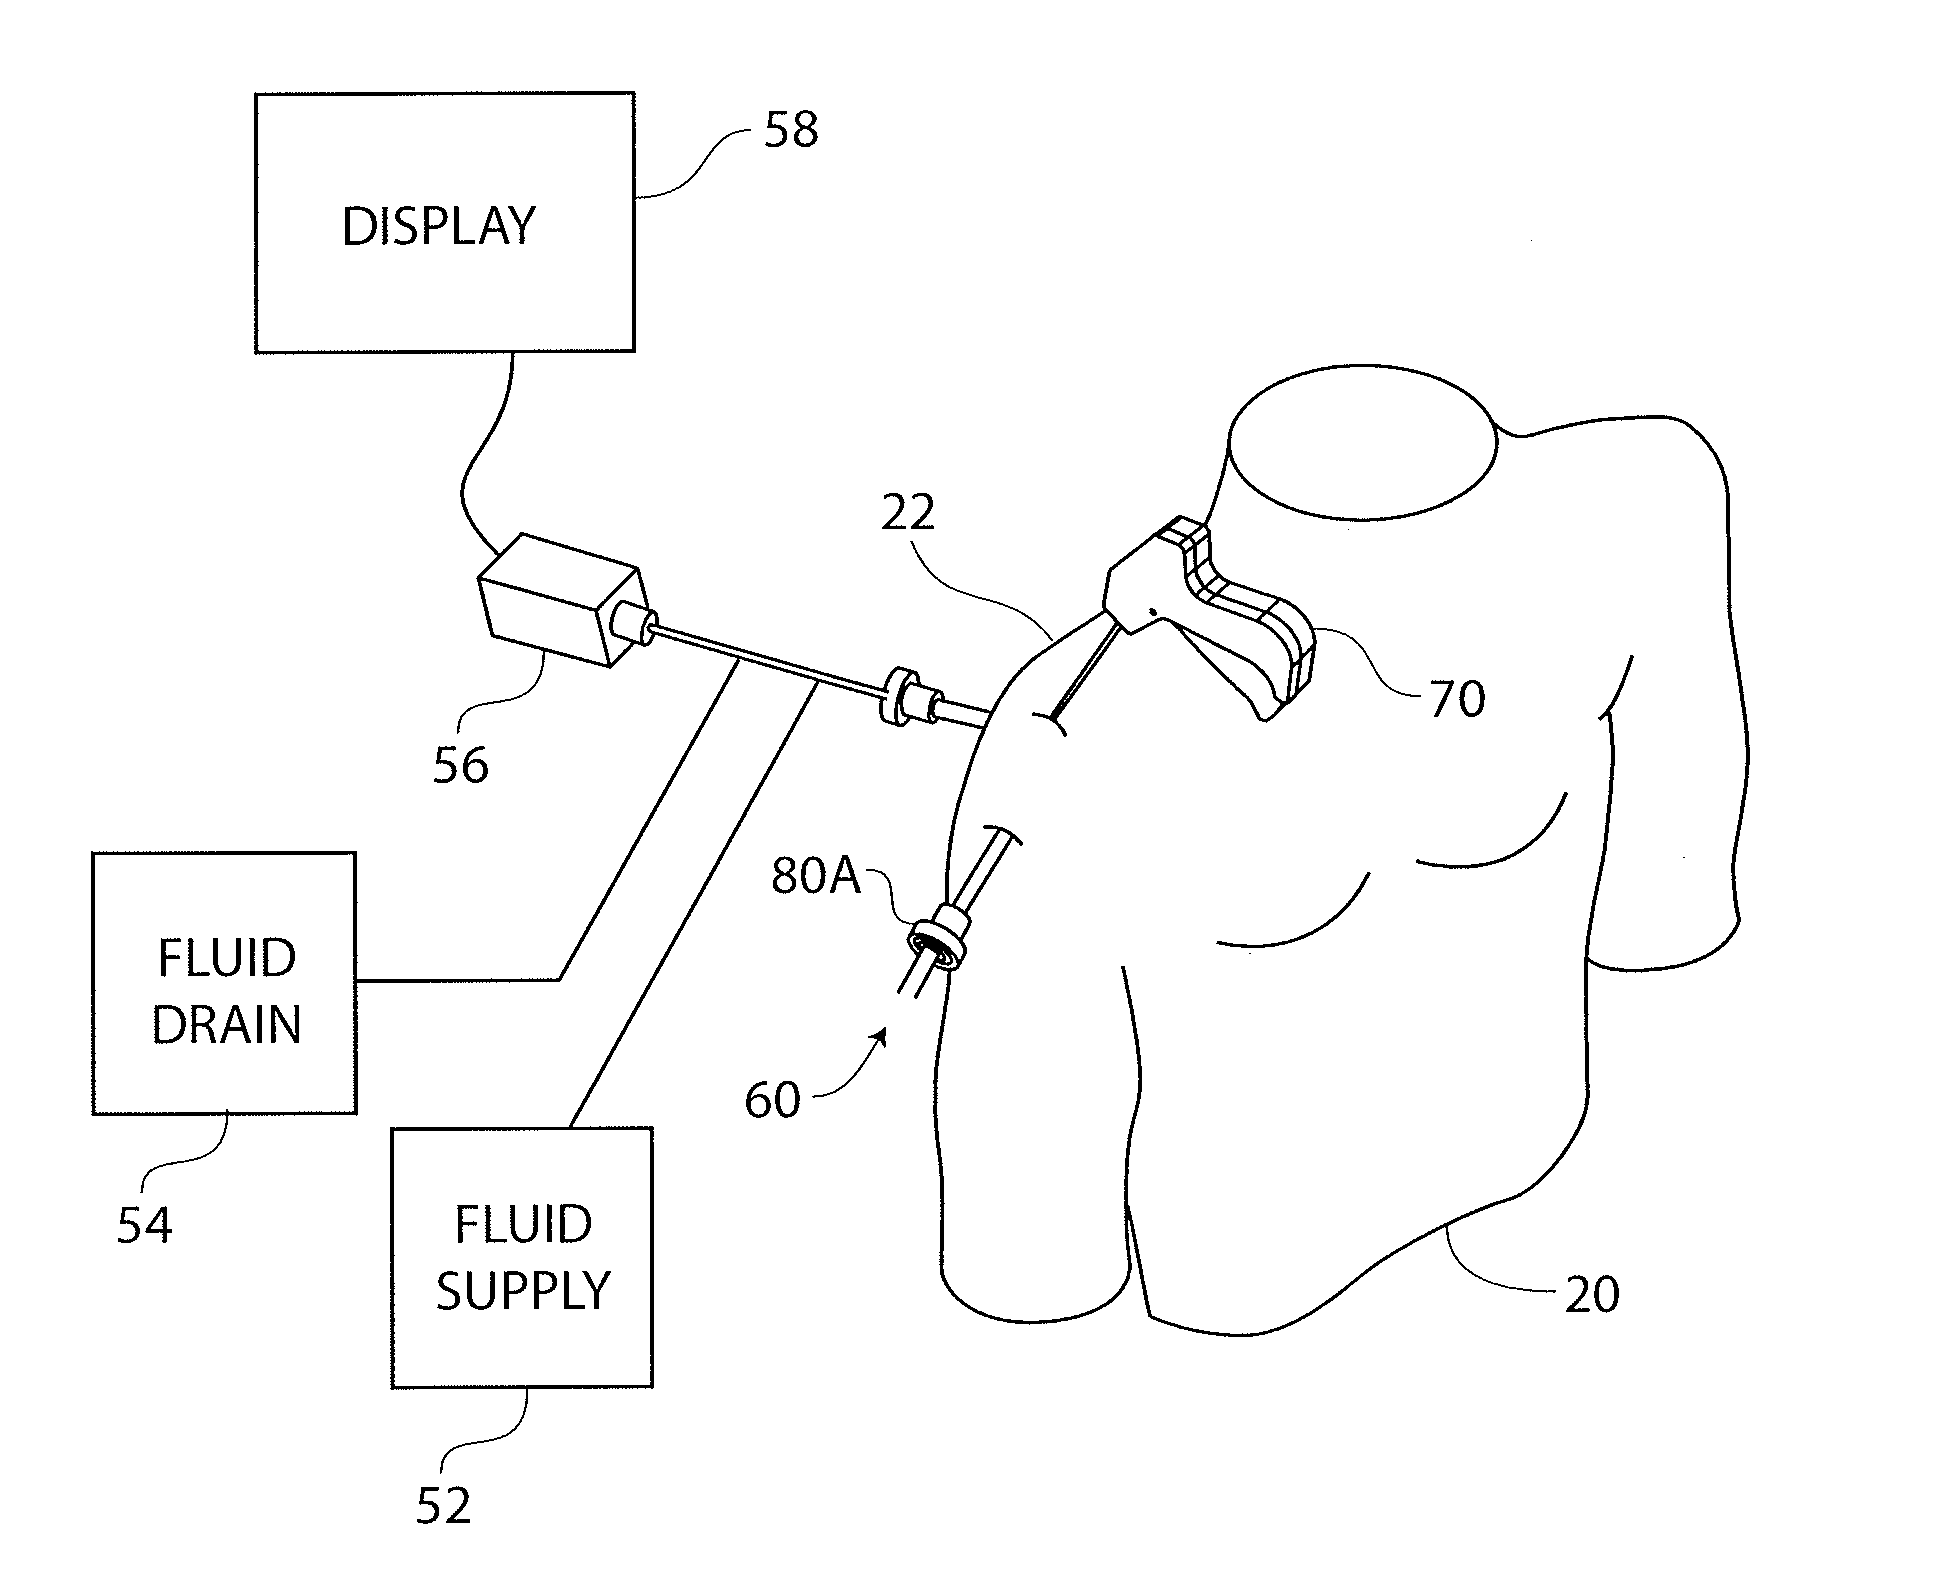 Guidewire having a distal fixation member for delivering and positioning sheet-like materials in surgery